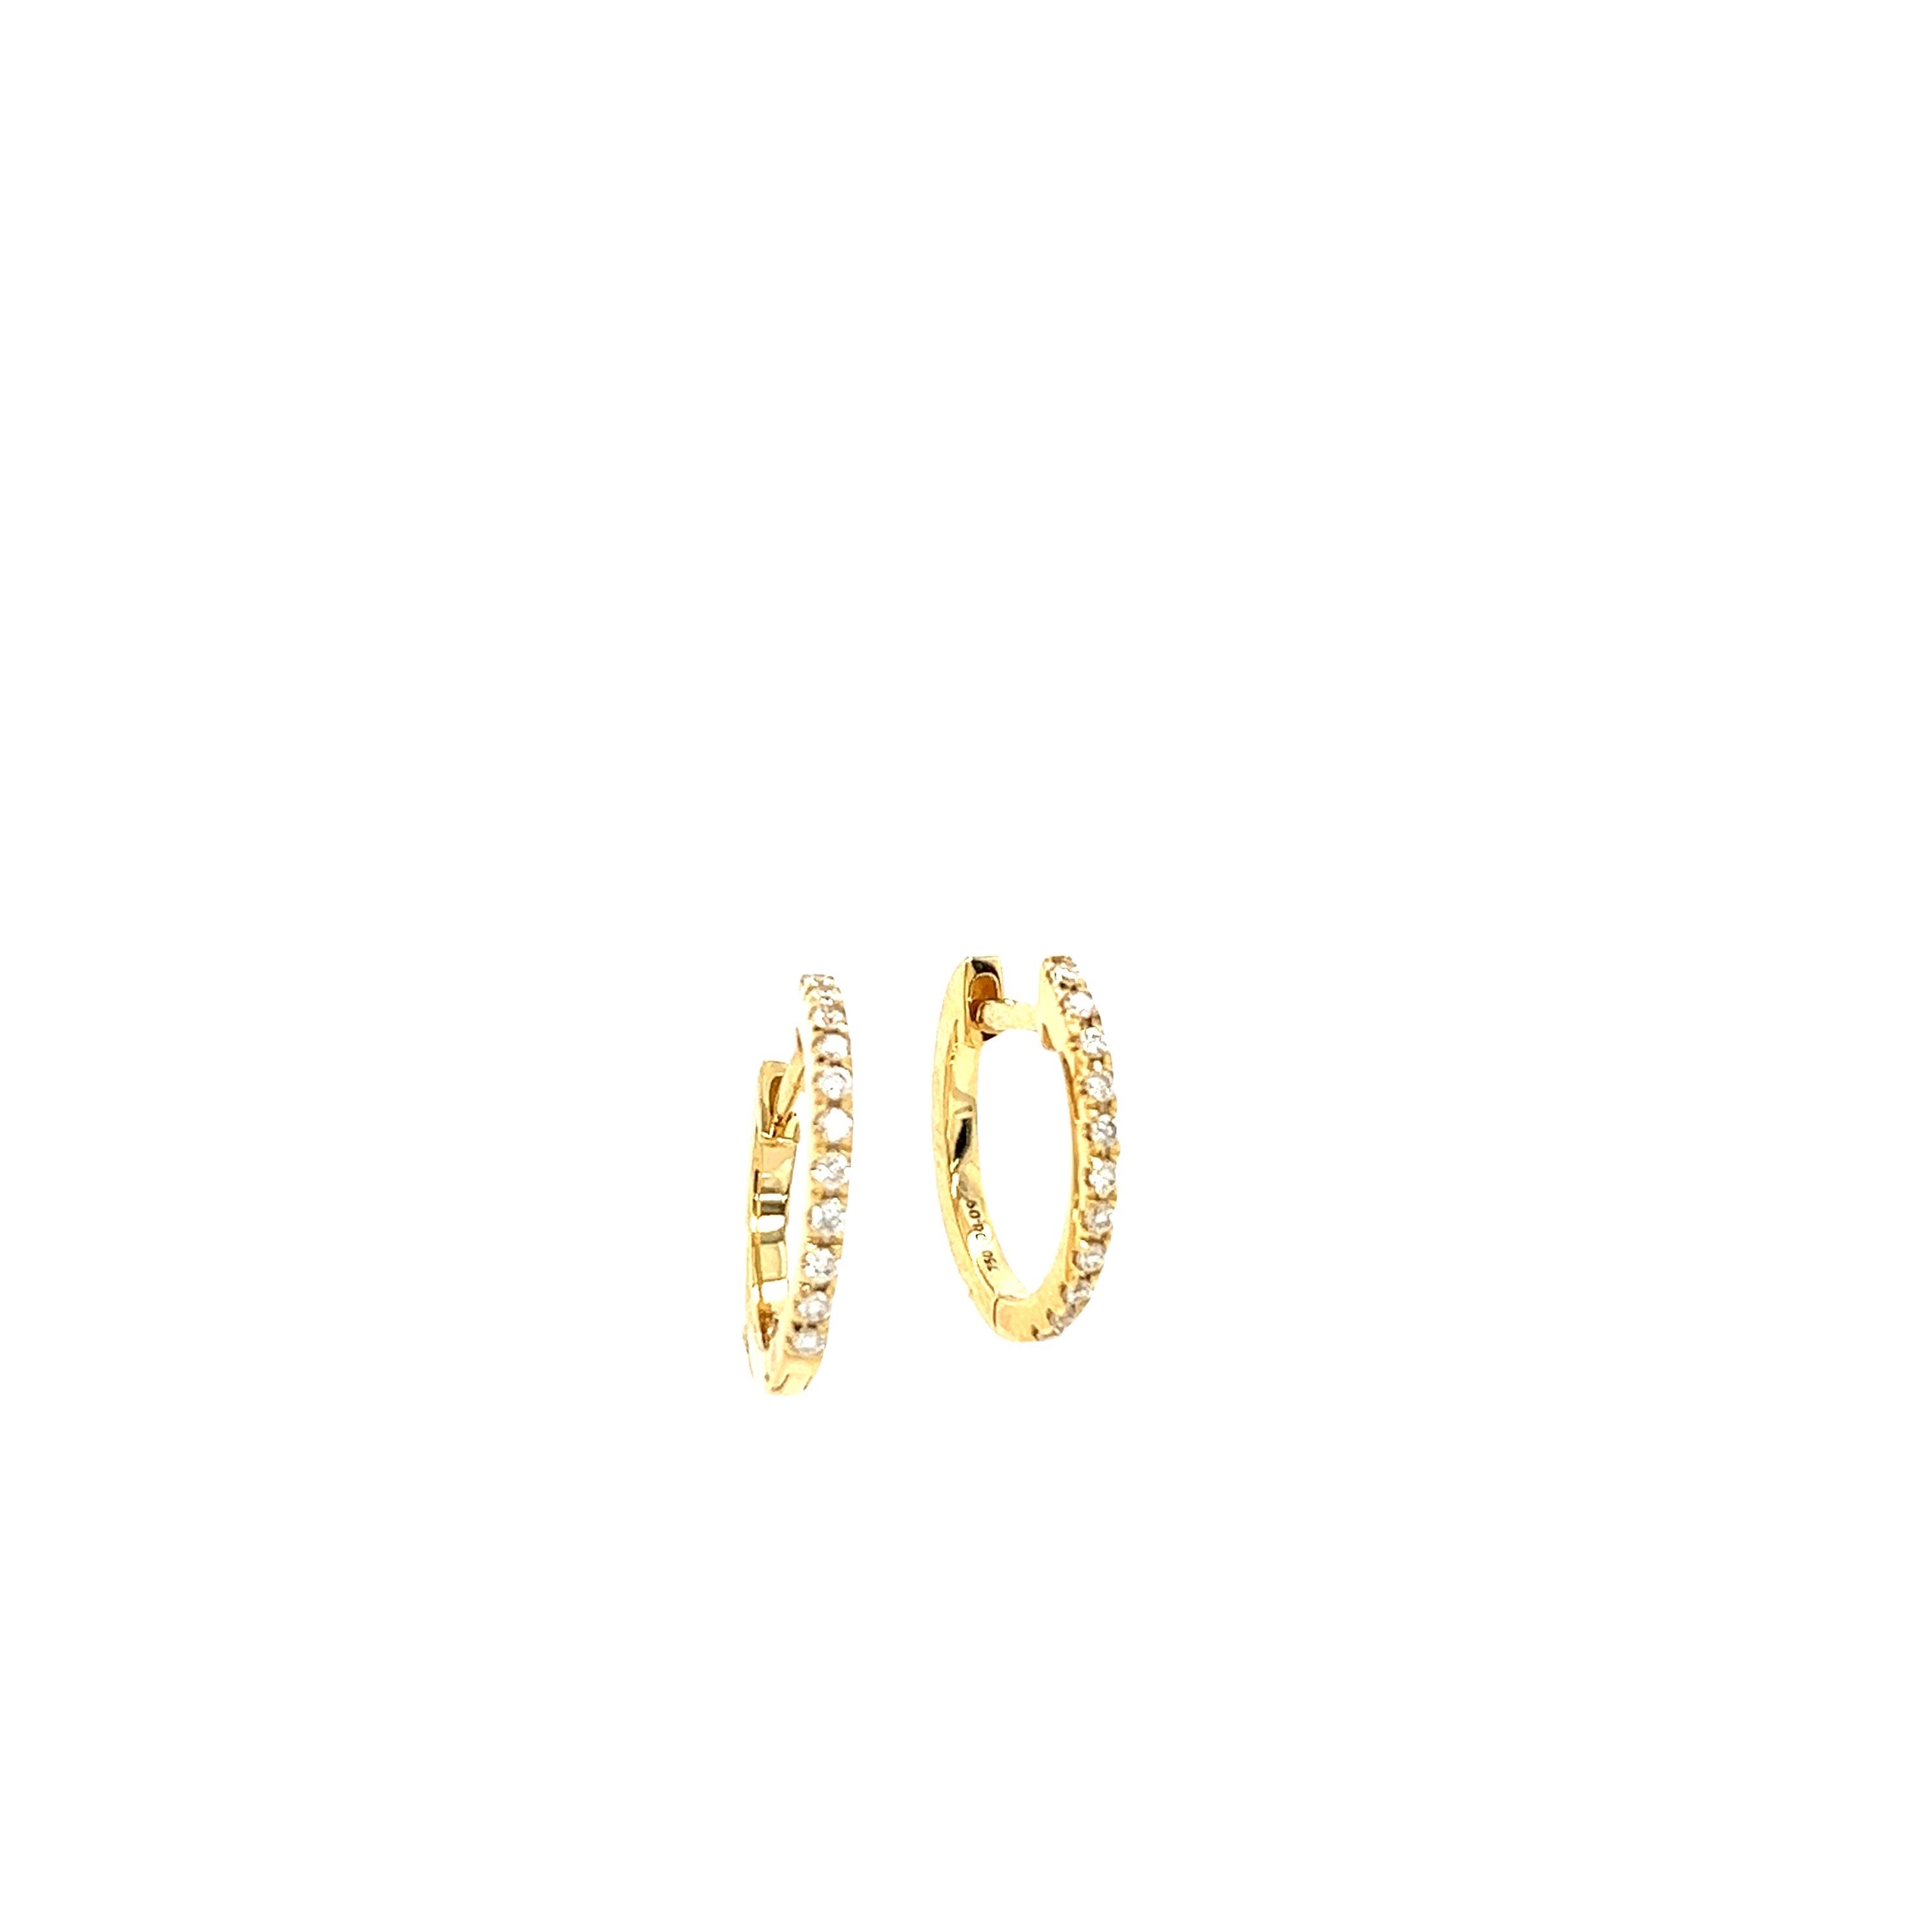 Round Cut 18ct Yellow Gold Diamond Hoop Earrings, Set With 0.09ct Of Round Diamonds, 11mm For Sale